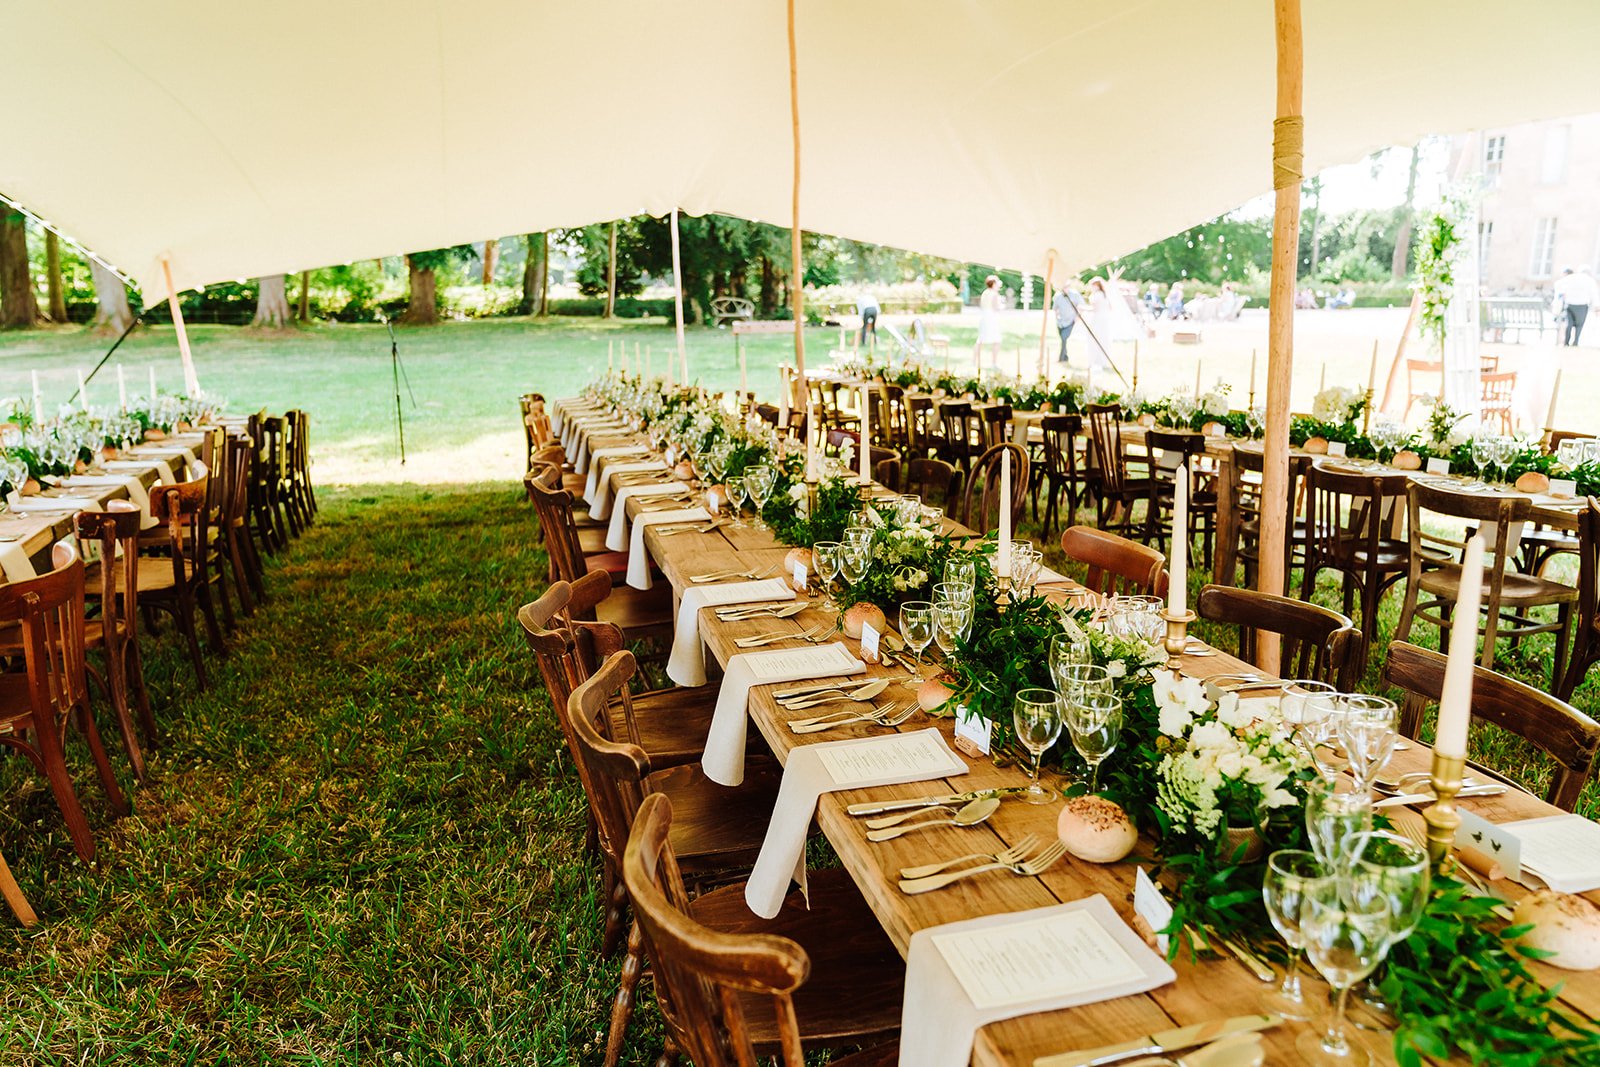 Long tables setup under a marquee with wooden chairs and decorated with flowers for a wedding at the chateau.